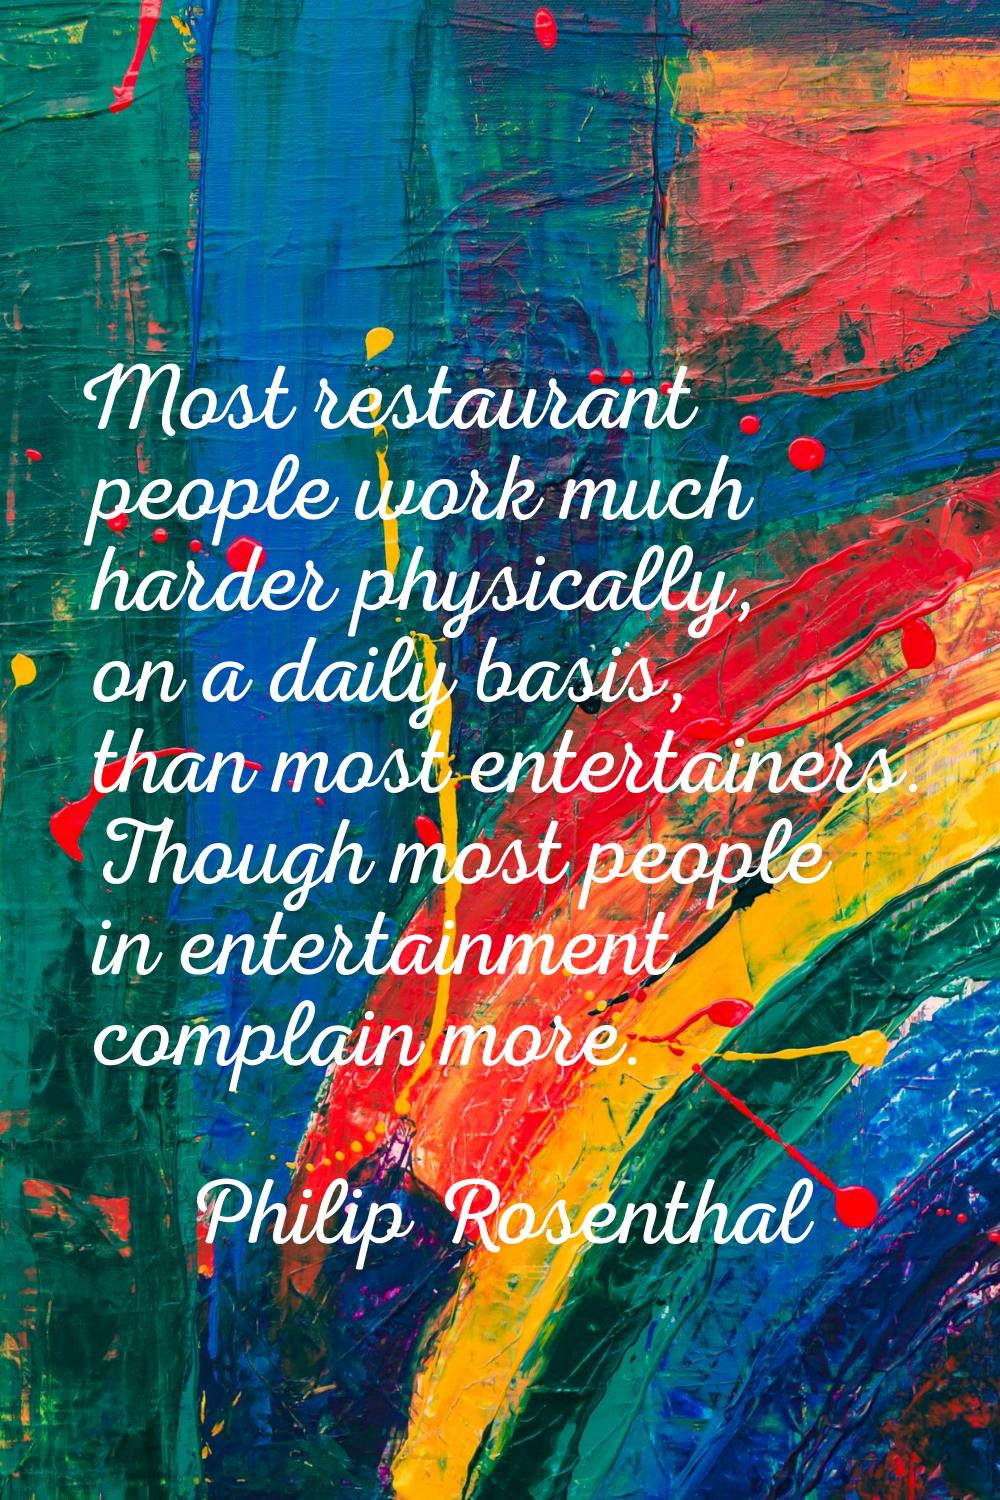 Most restaurant people work much harder physically, on a daily basis, than most entertainers. Thoug